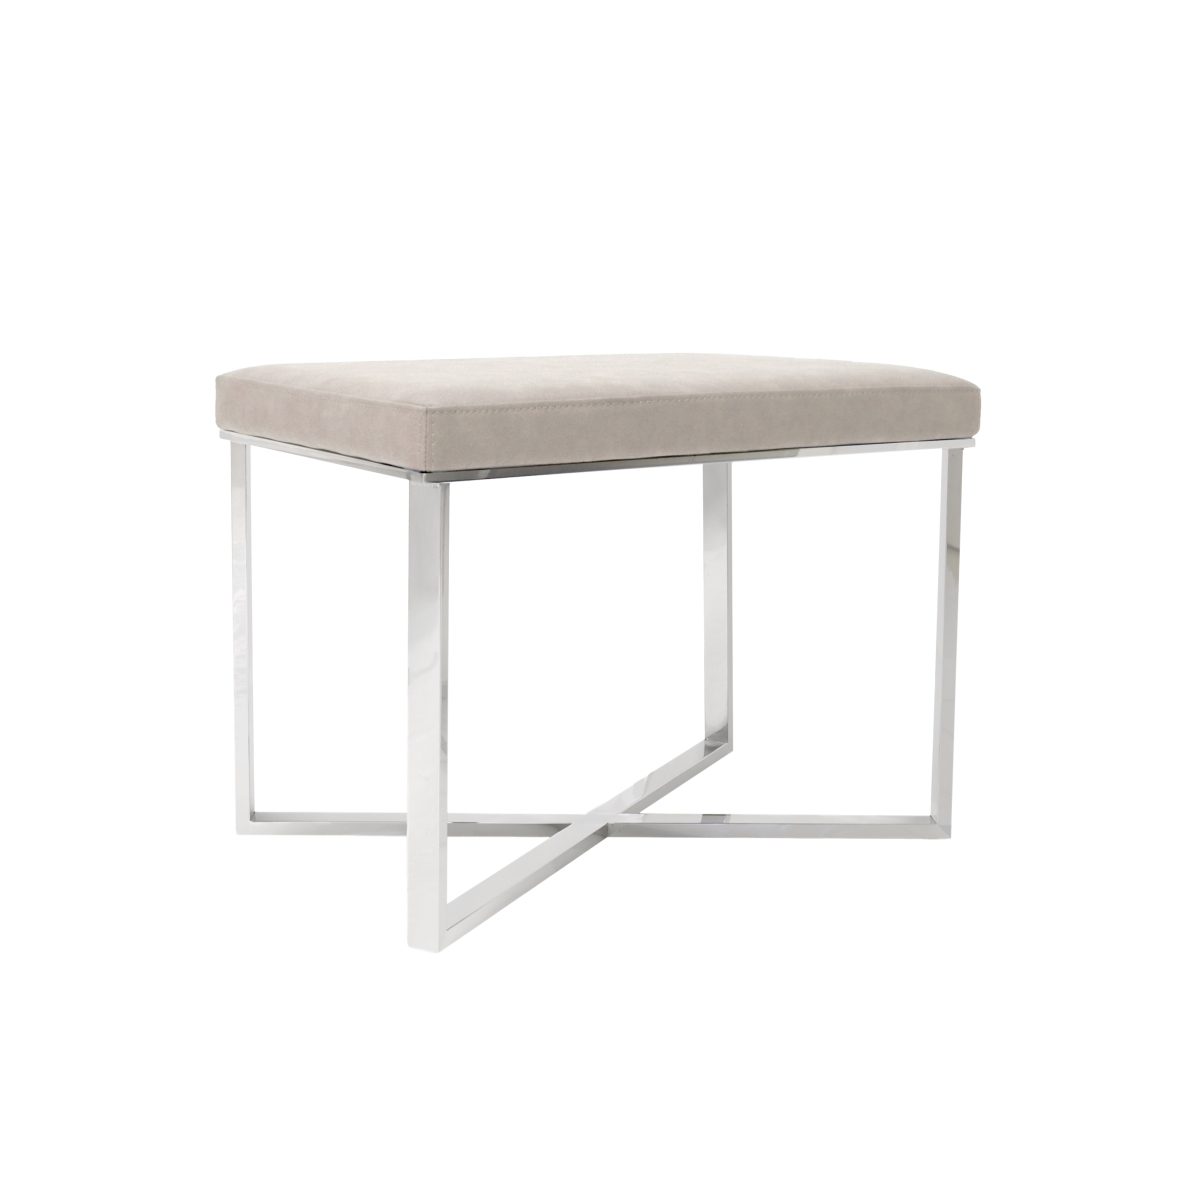 Y-1031b Luxe Collection Stool, Beige - 24 X 16 X 18 In.